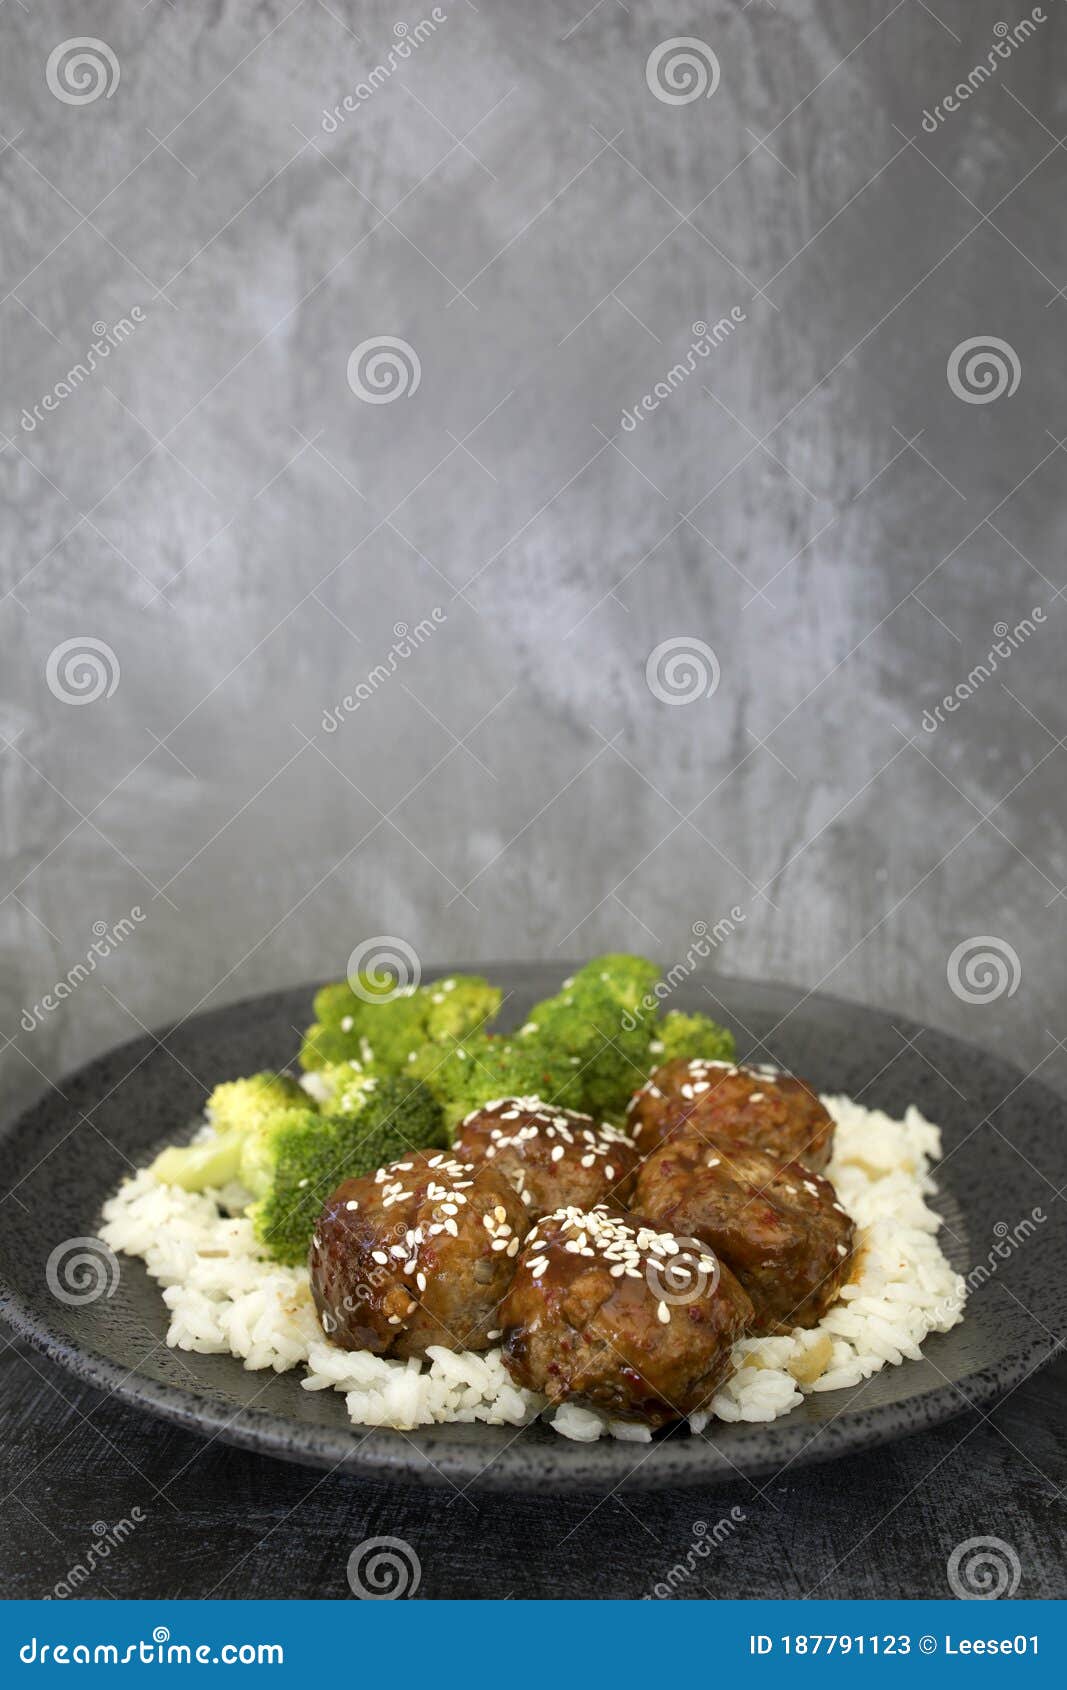 Spicy Asian Meatballs with White Rice Stock Image - Image of asian ...